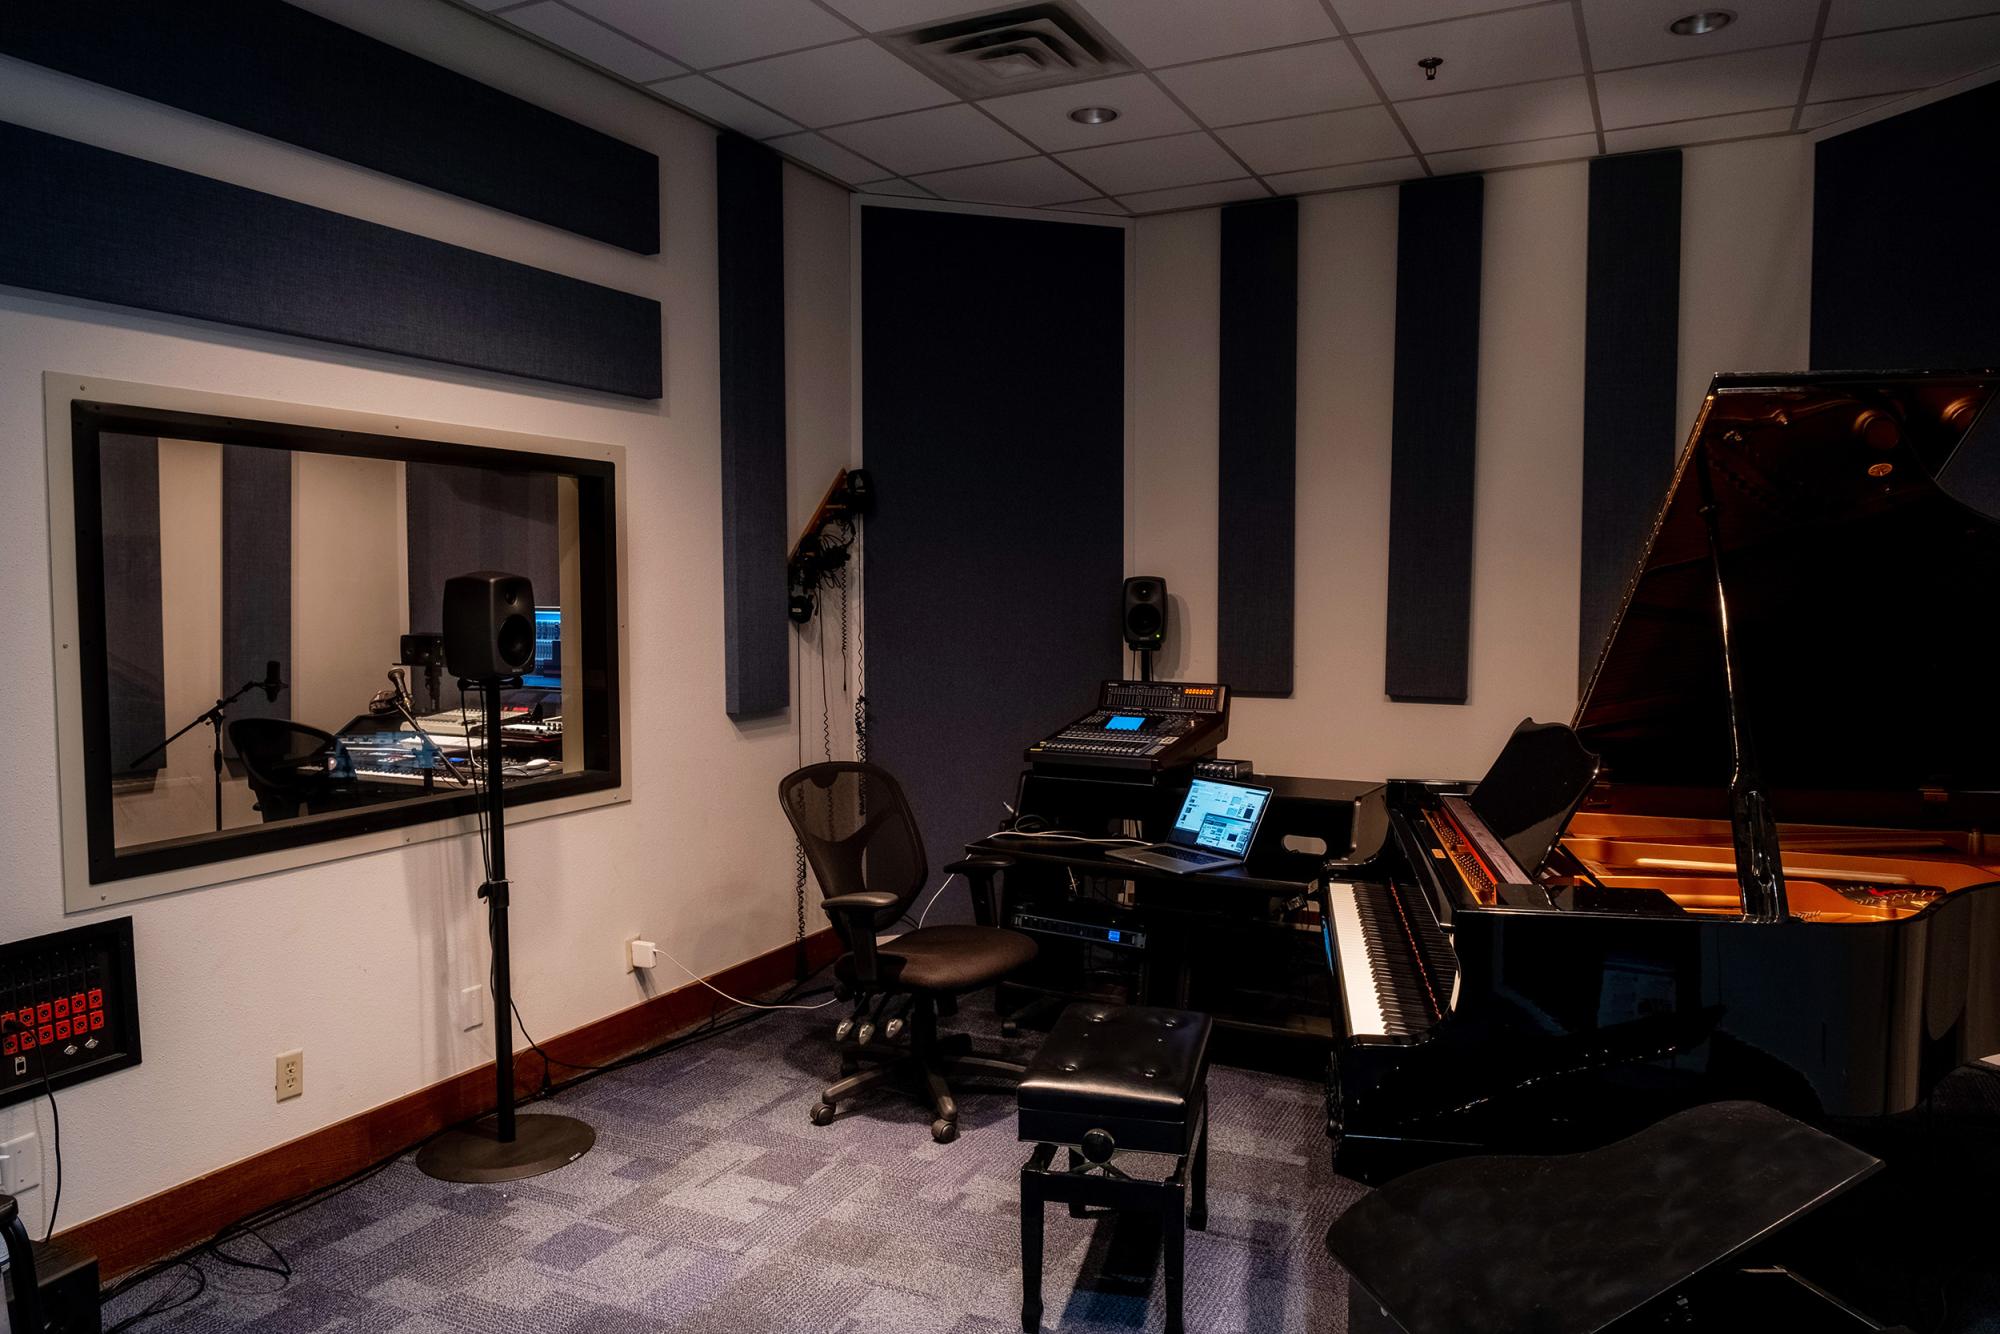 Studio space with a grand piano and recording equipment